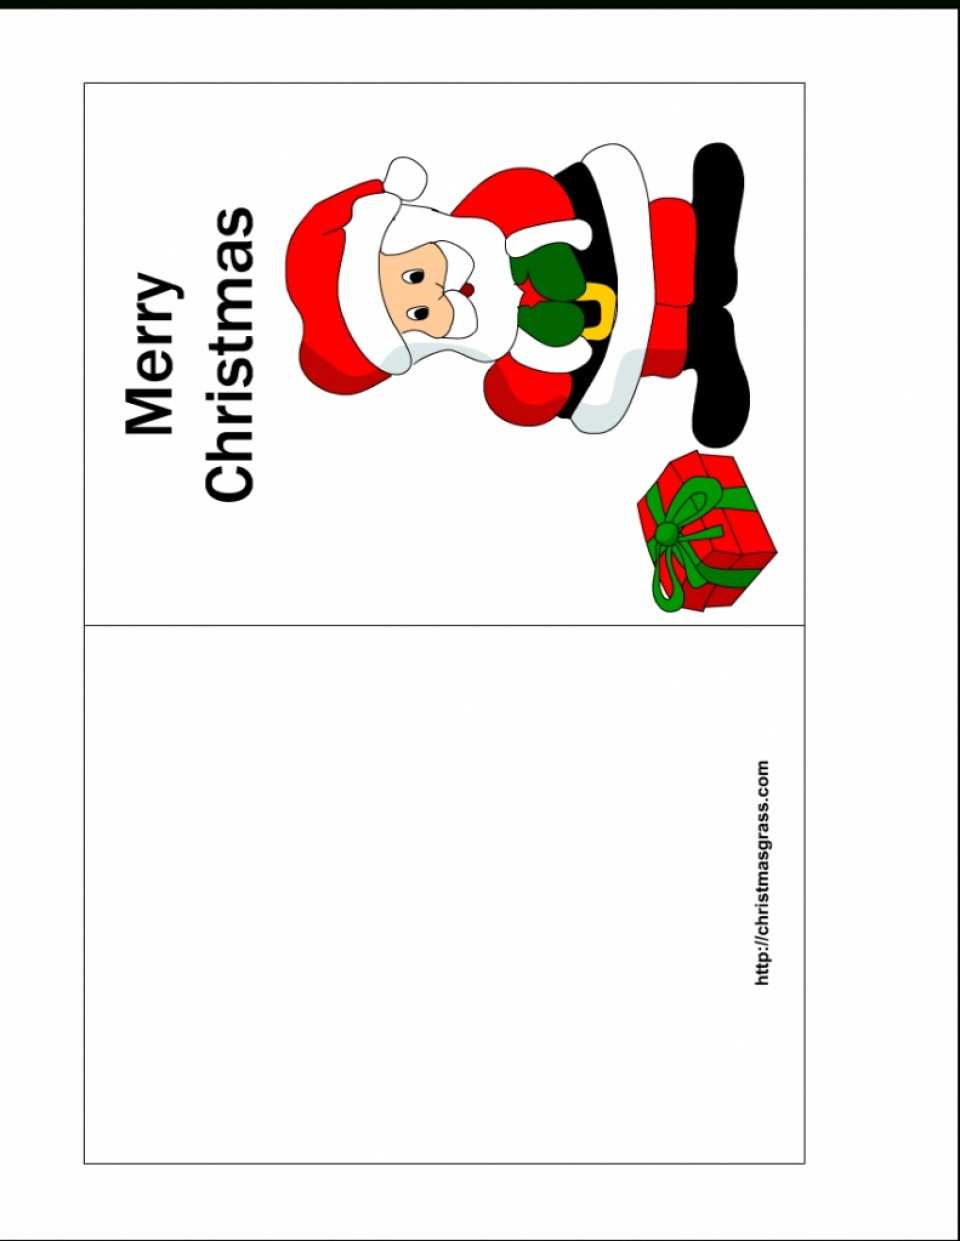 89 Adding Christmas Card Template Open Office Templates for Christmas Card Template Open Office